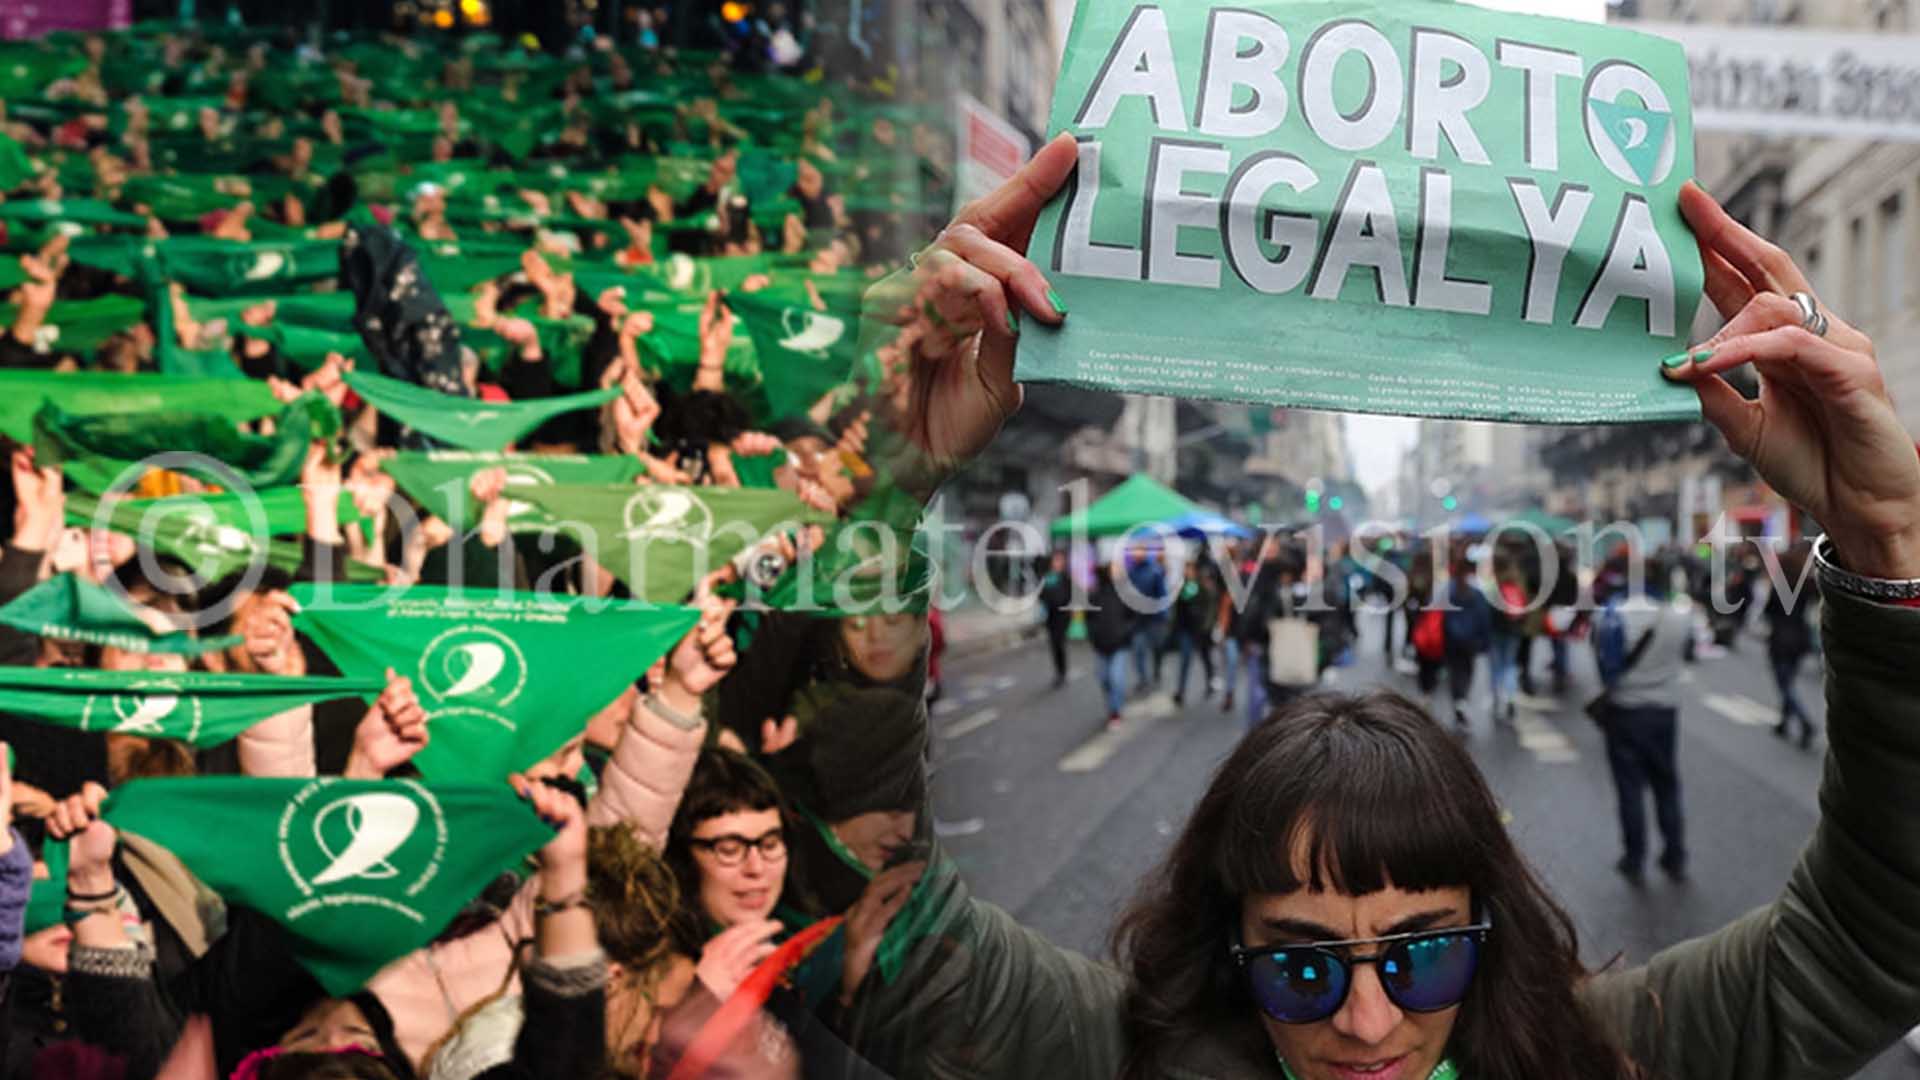 Legalization of abortion in Argentina